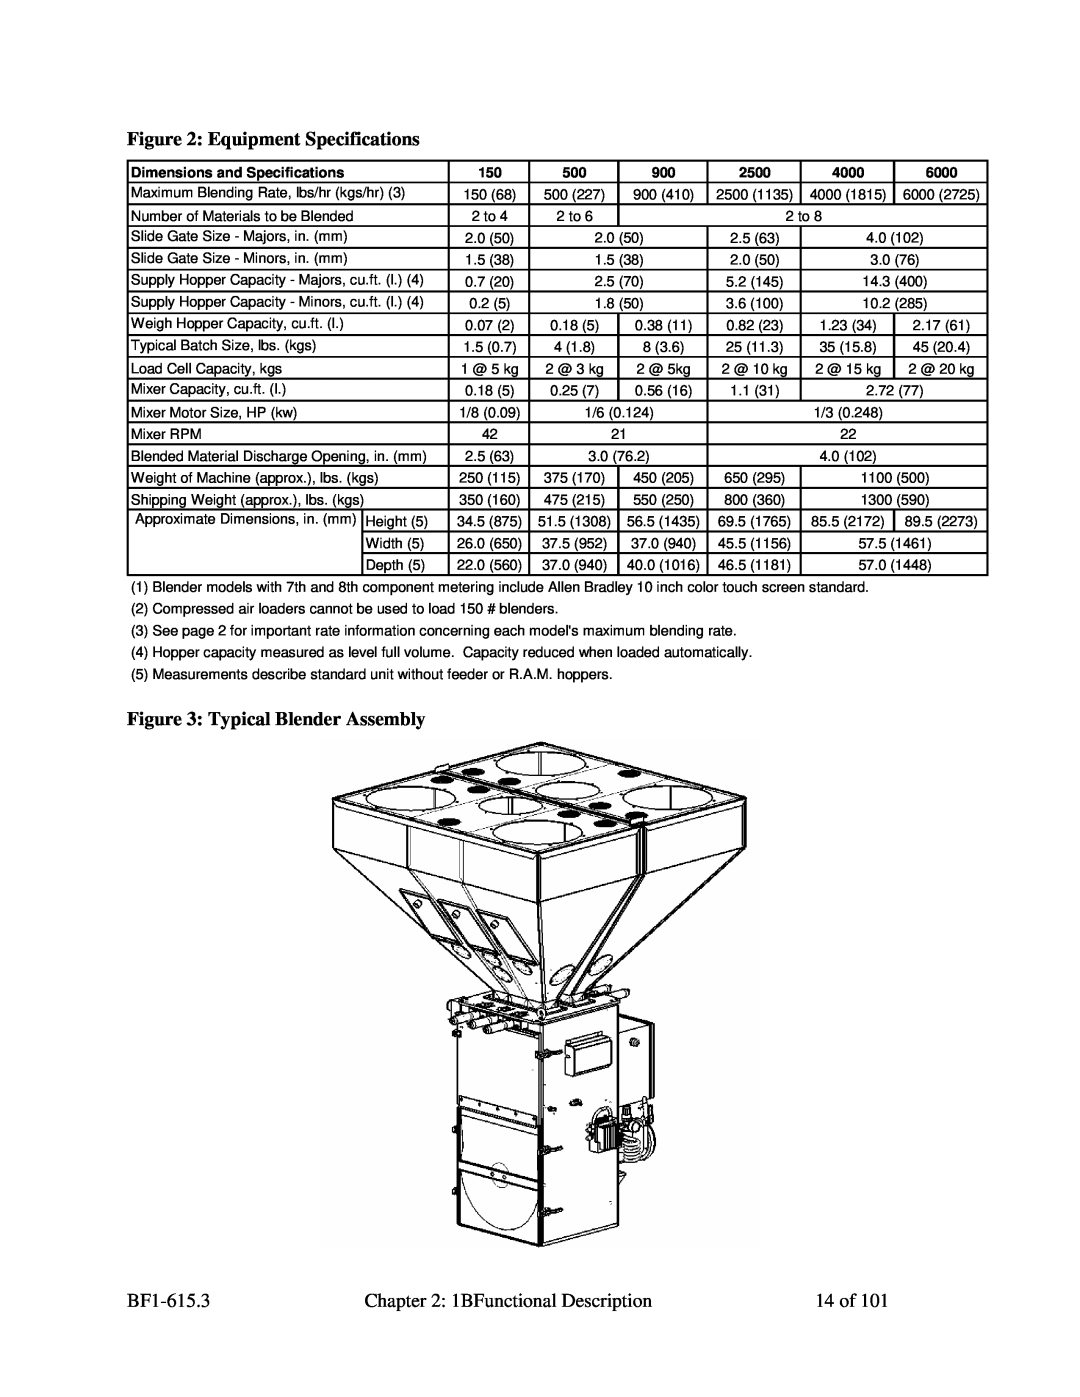 Mitsubishi Electronics 882.00273.00 Equipment Specifications, Typical Blender Assembly, Dimensions and Specifications 